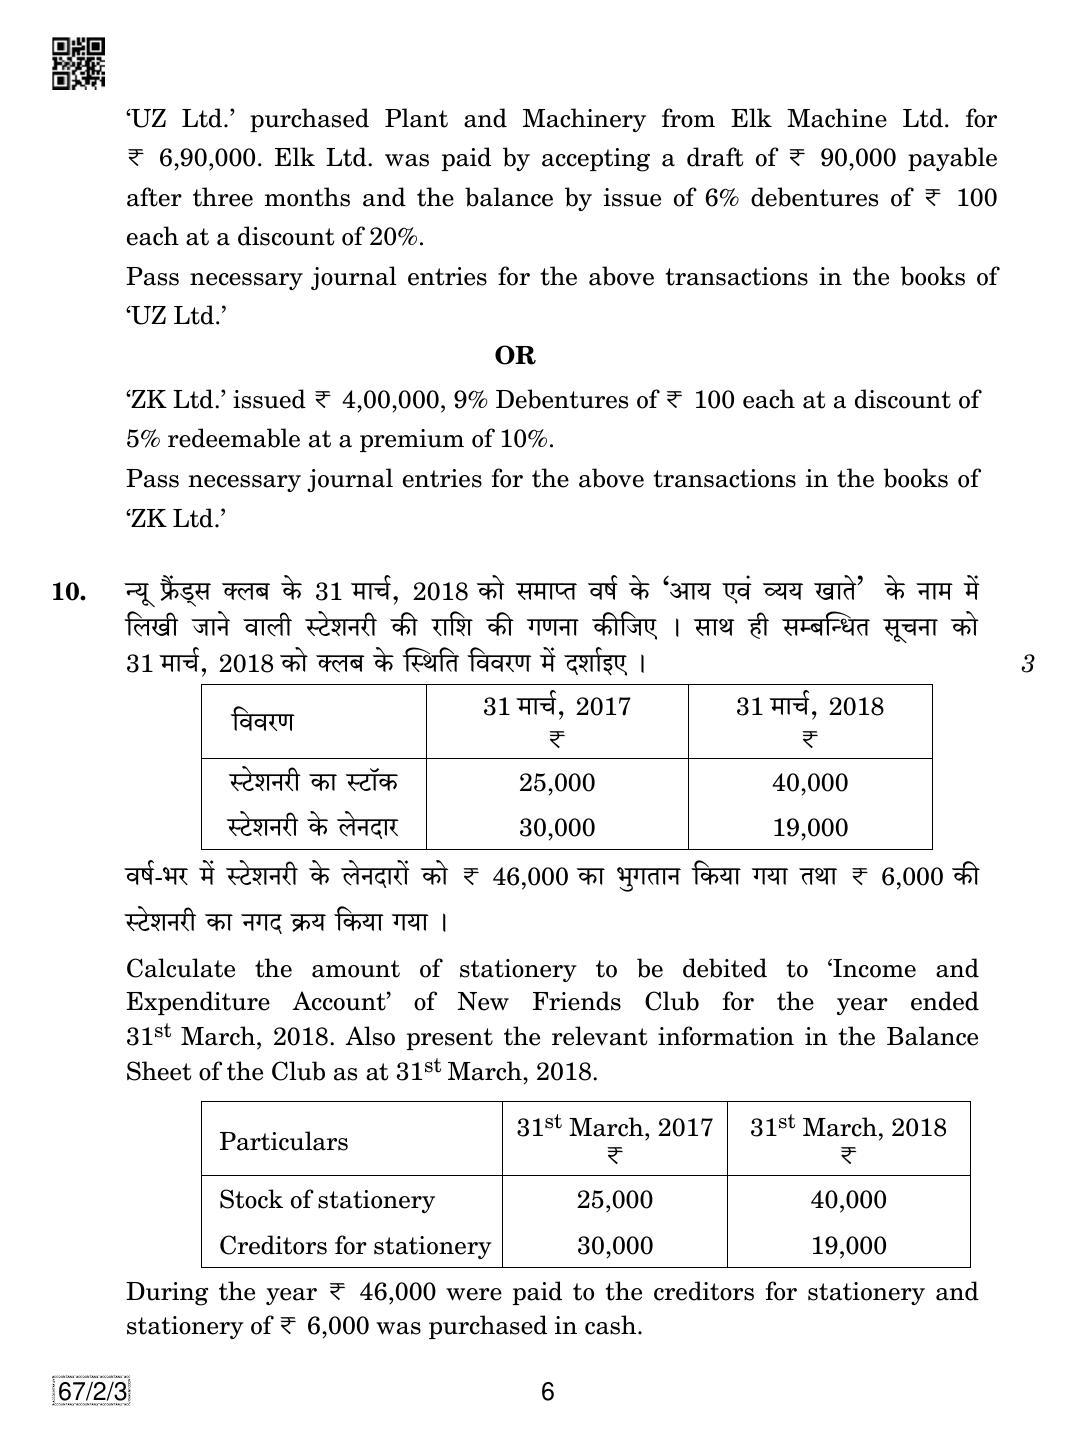 CBSE Class 12 67-2-3 Accountancy 2019 Question Paper - Page 6